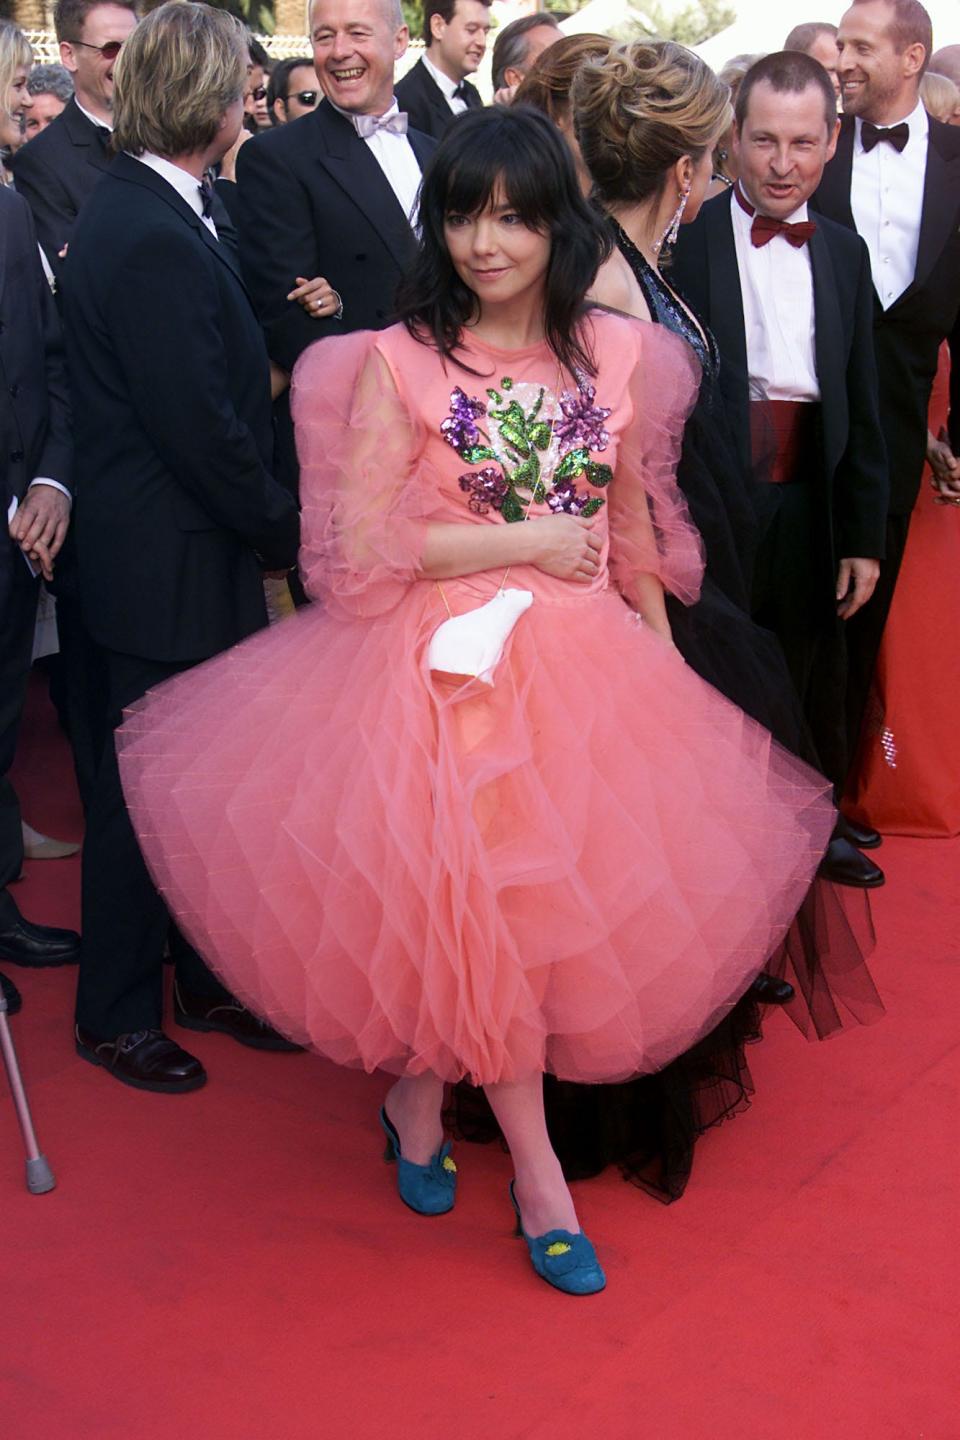 Bjork at the 200 Cannes Film Festival in a pink dress and blue heels.